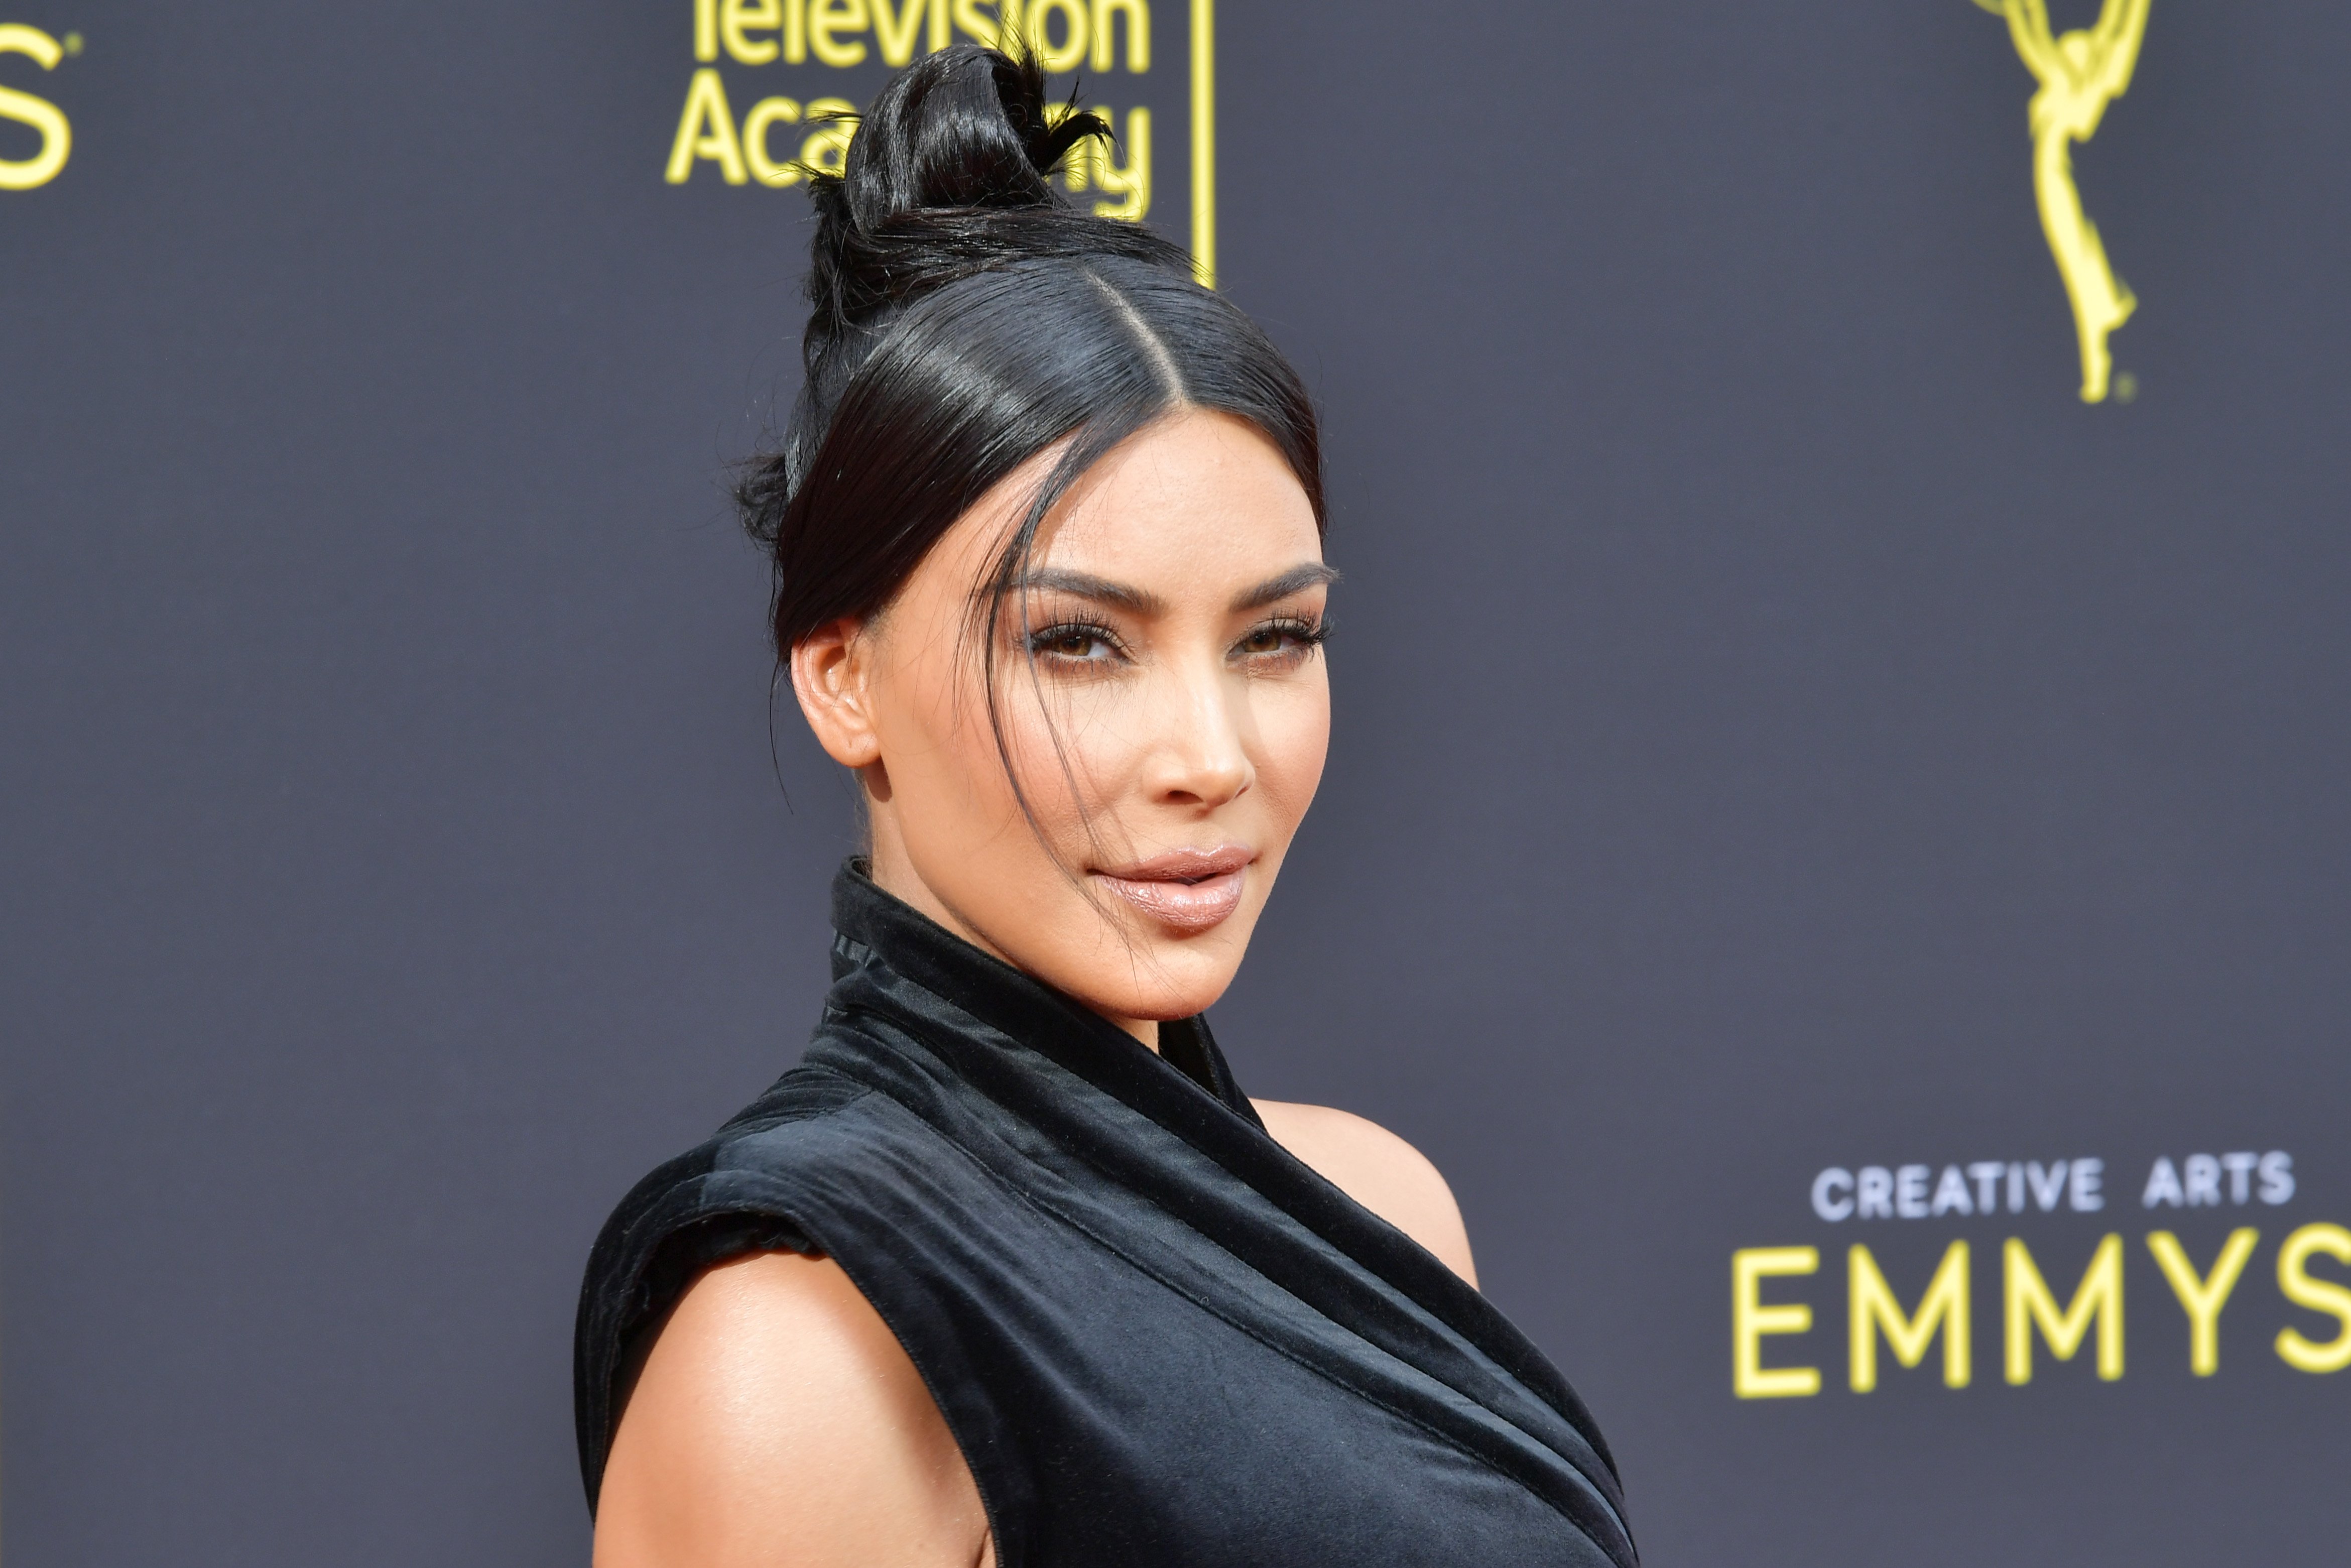 Kim Kardashian West at the 2019 Creative Arts Emmy Awards in Los Angeles on September 14, 2019 | Photo: Getty Images